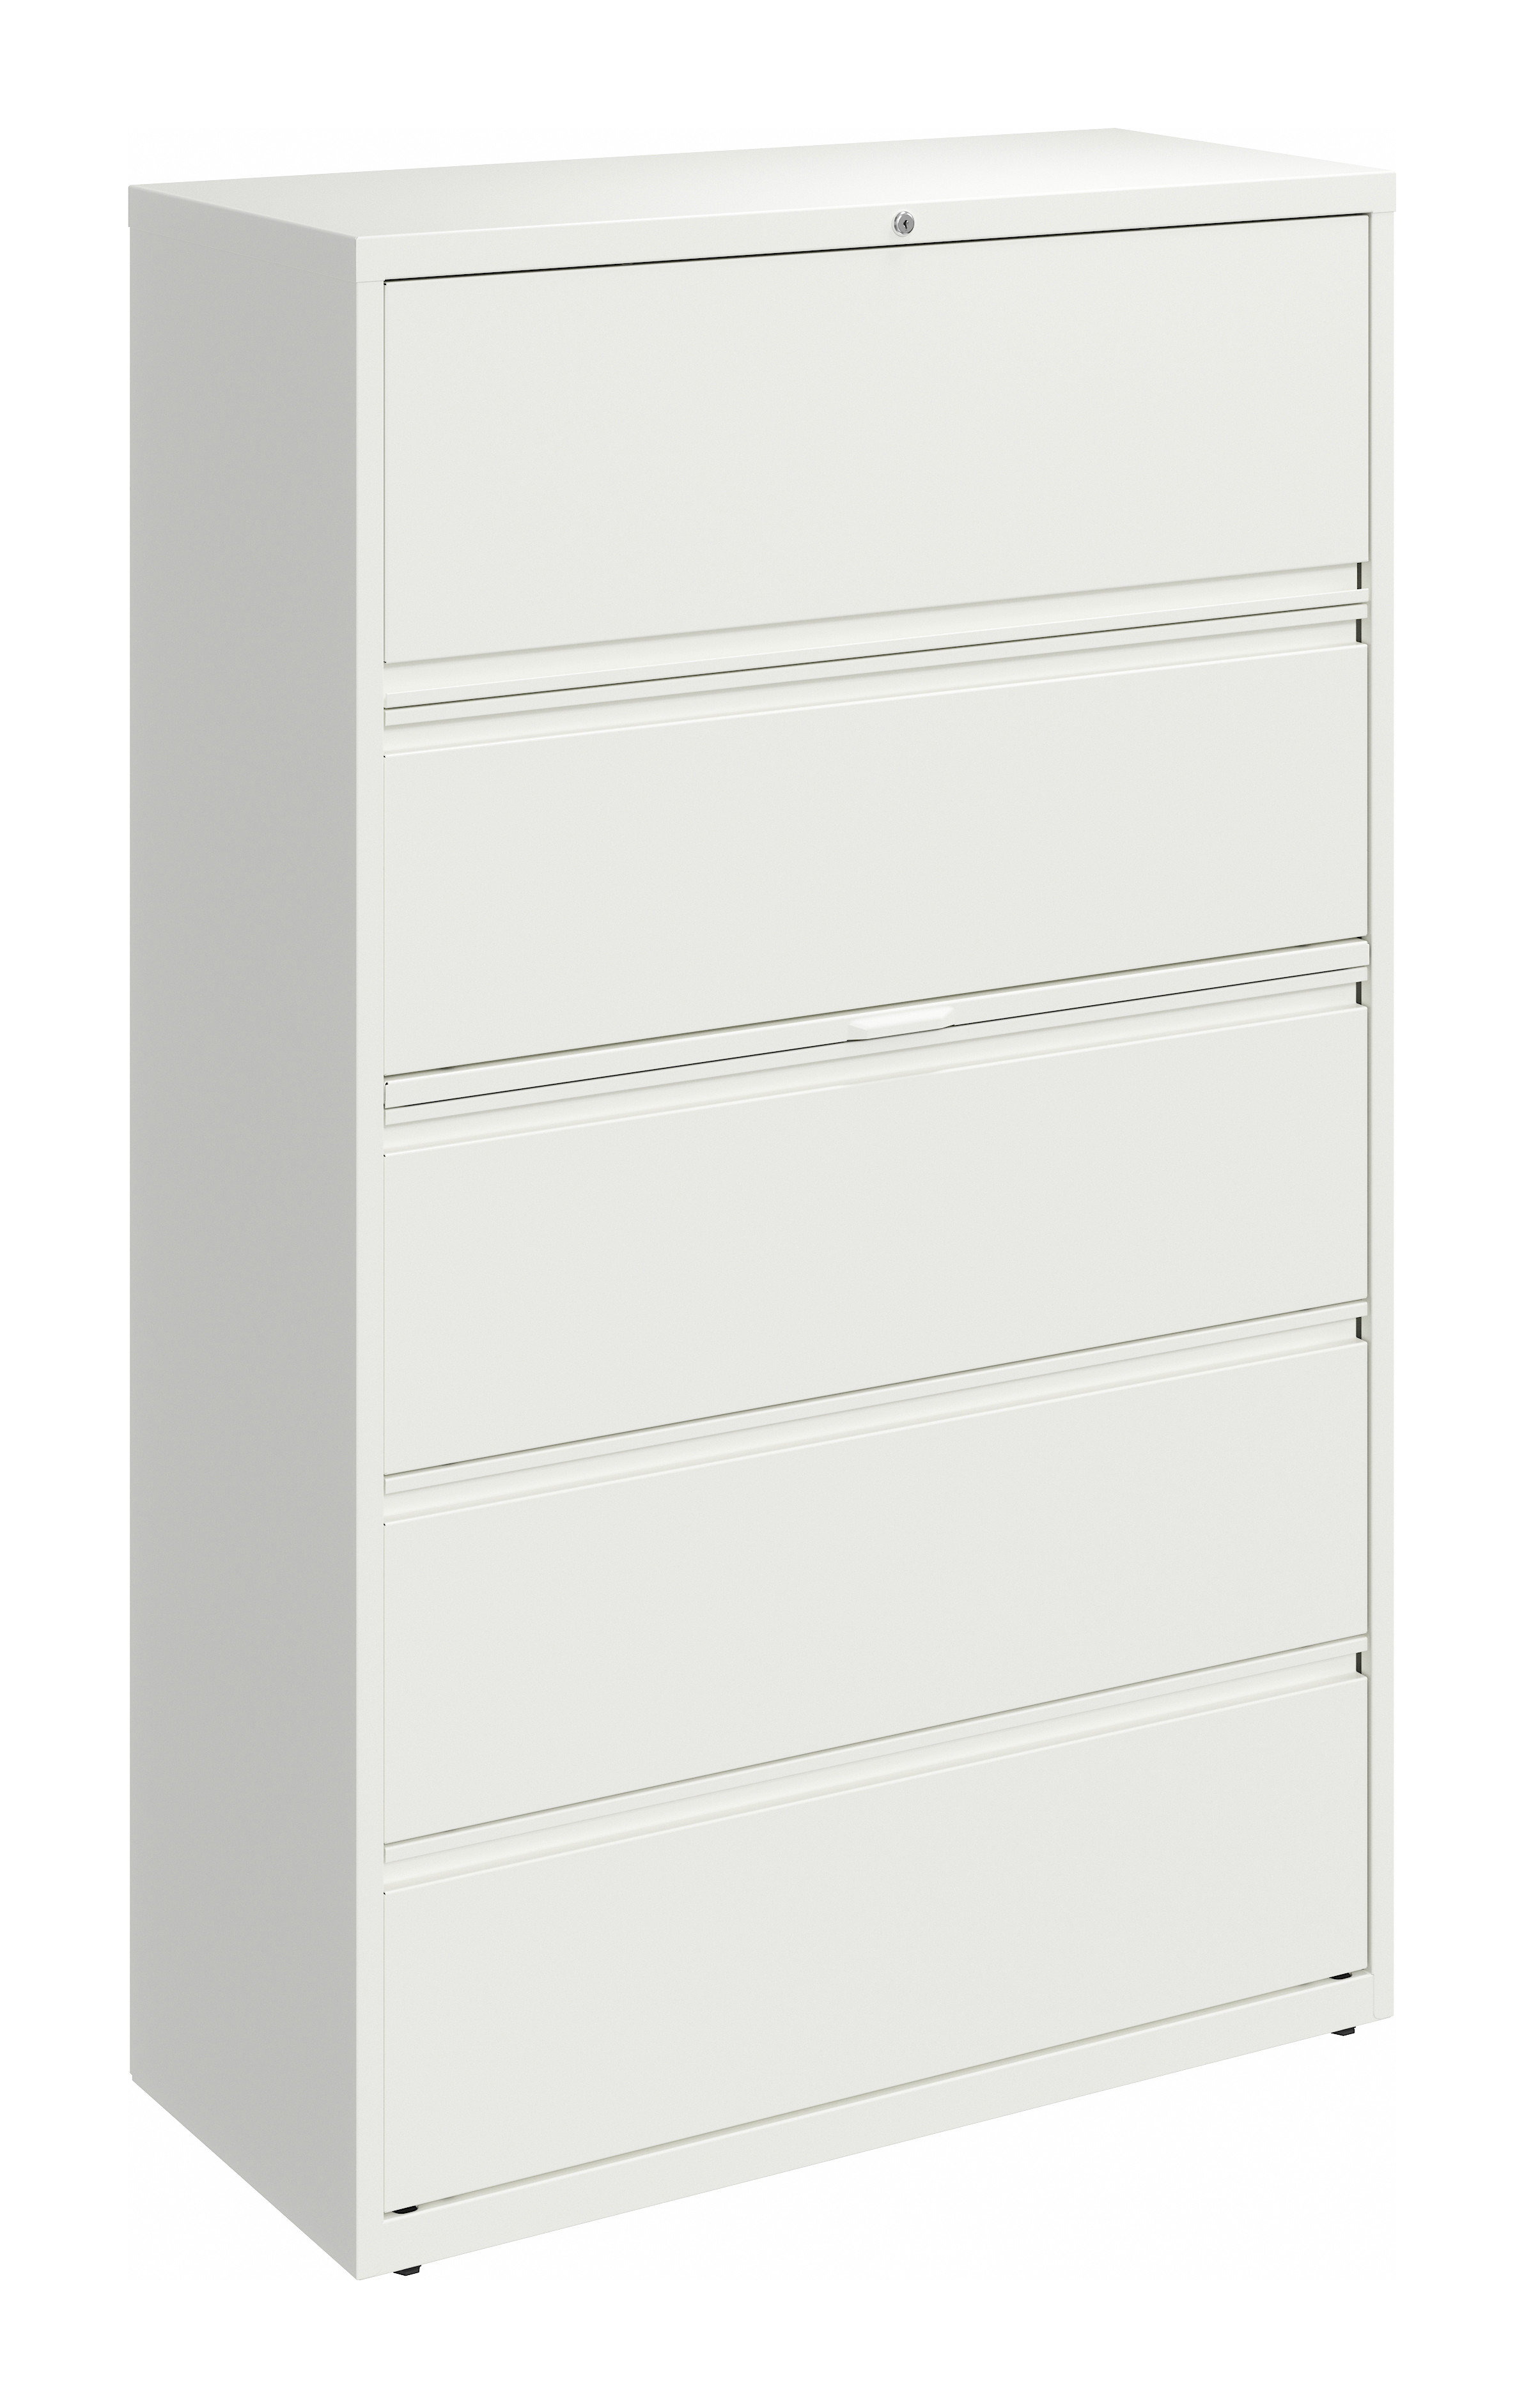 Hirsh 42 inch Wide 5 Drawer Metal Lateral File Cabinet for Home and Office, Holds Letter, Legal and A4 Hanging Folders, White - image 1 of 4